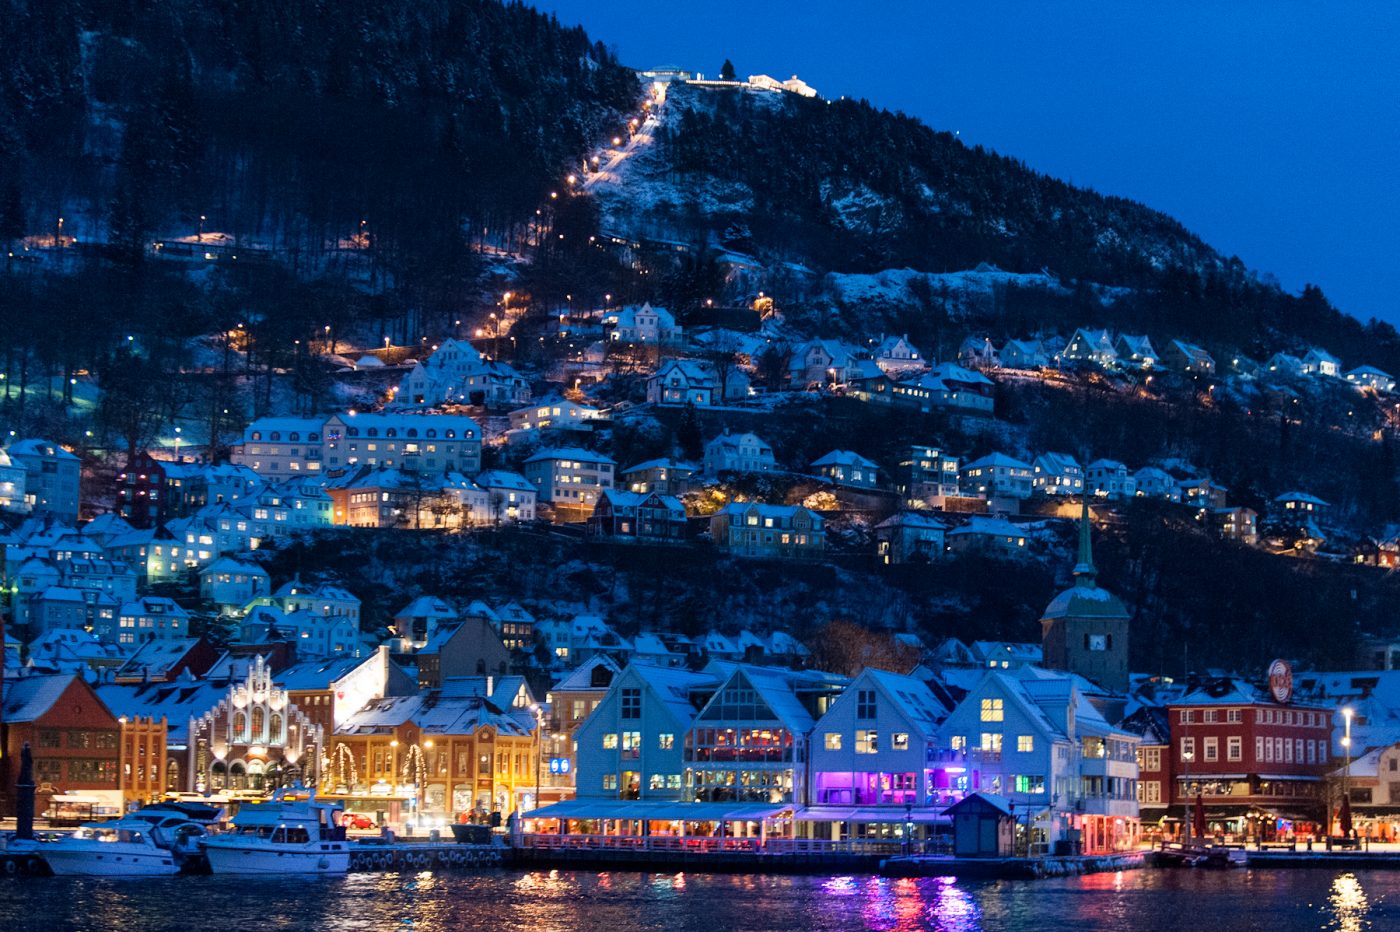 northern lights tours from bergen norway